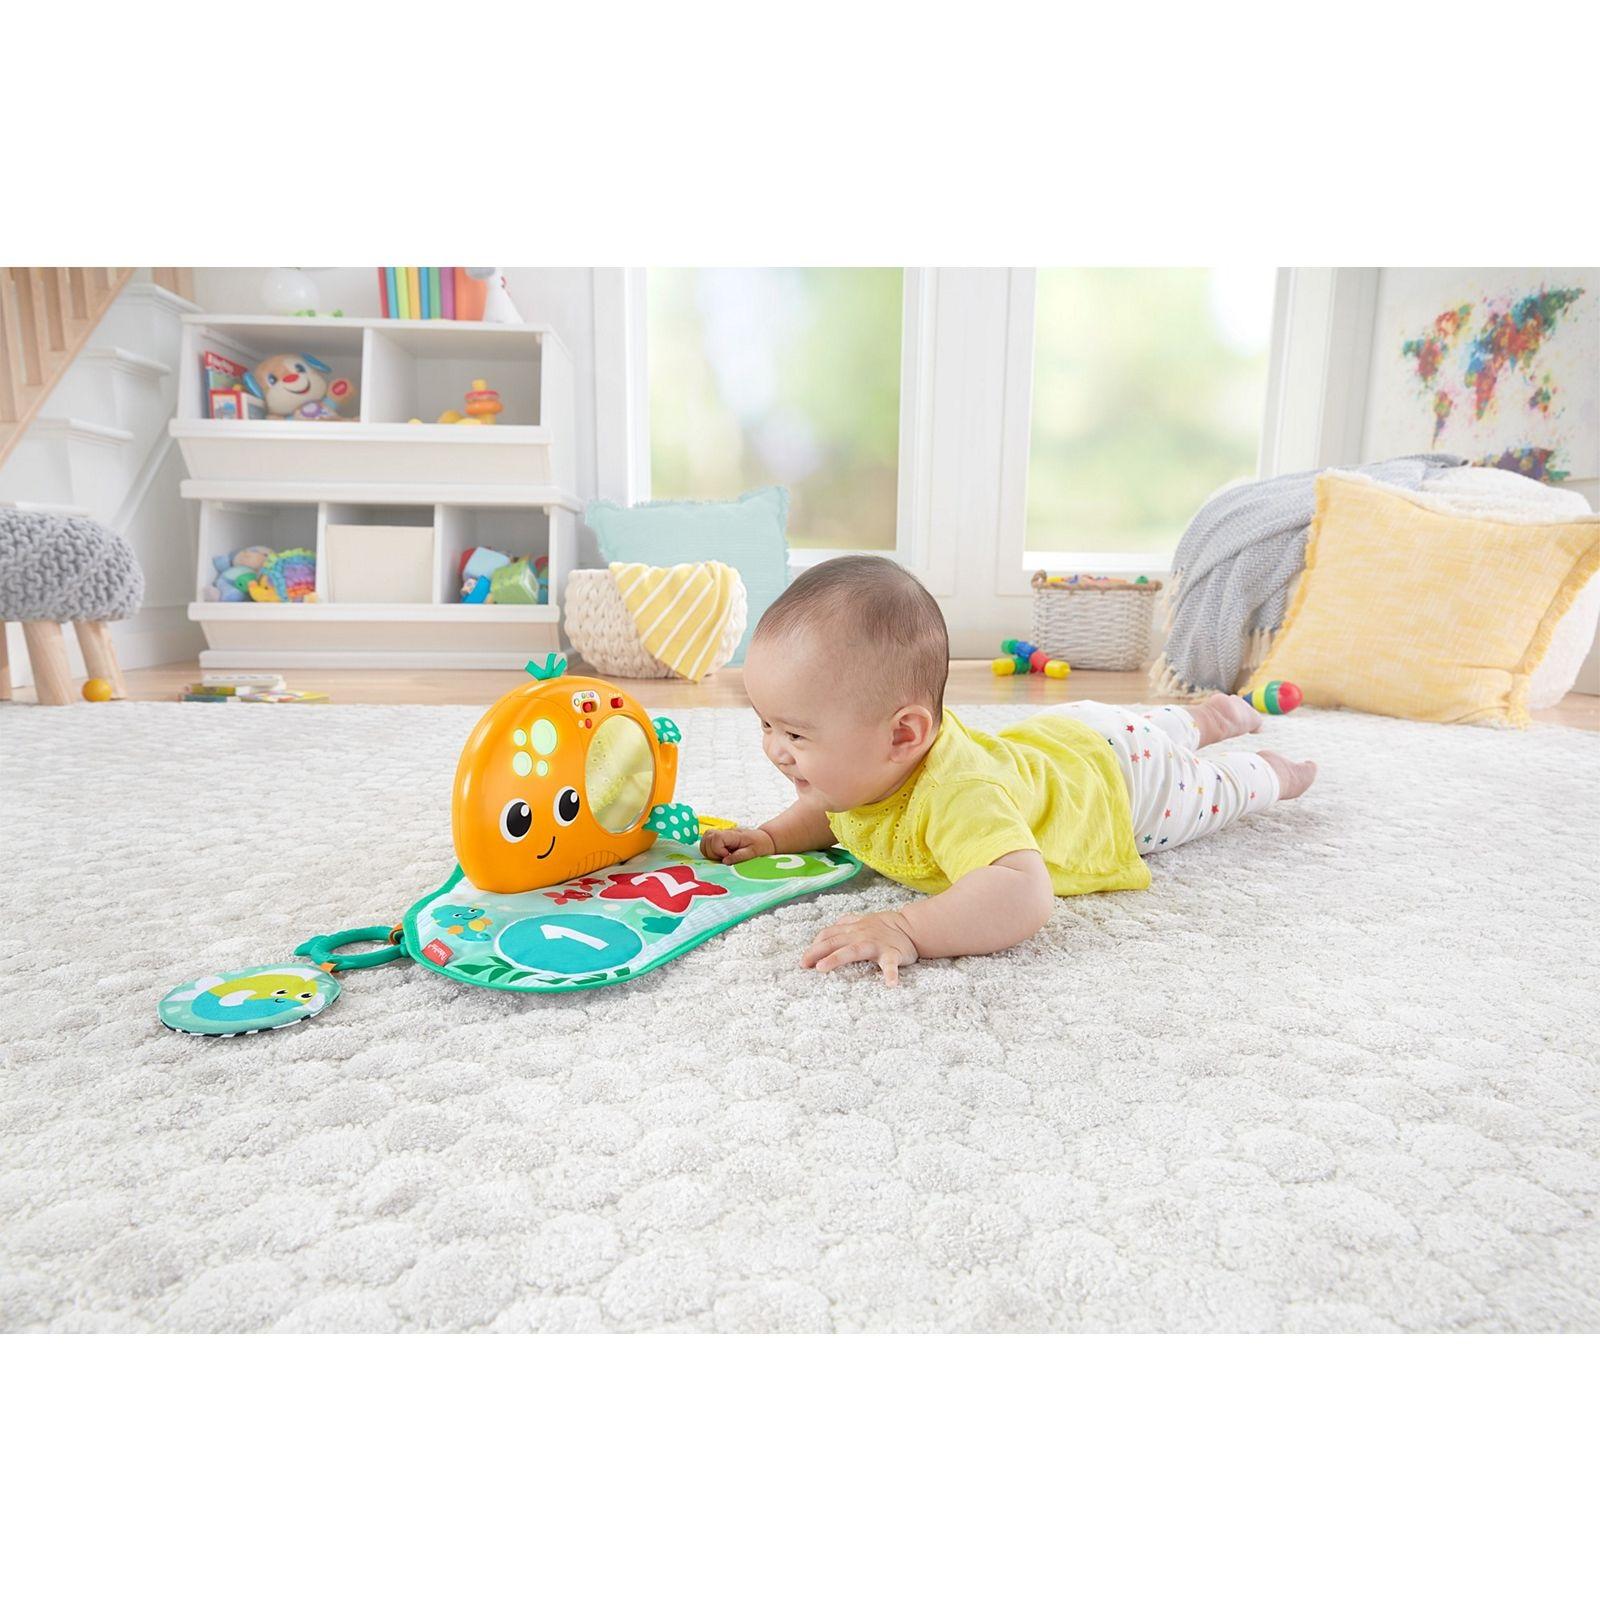 Selected image for Fisher Price activity kit